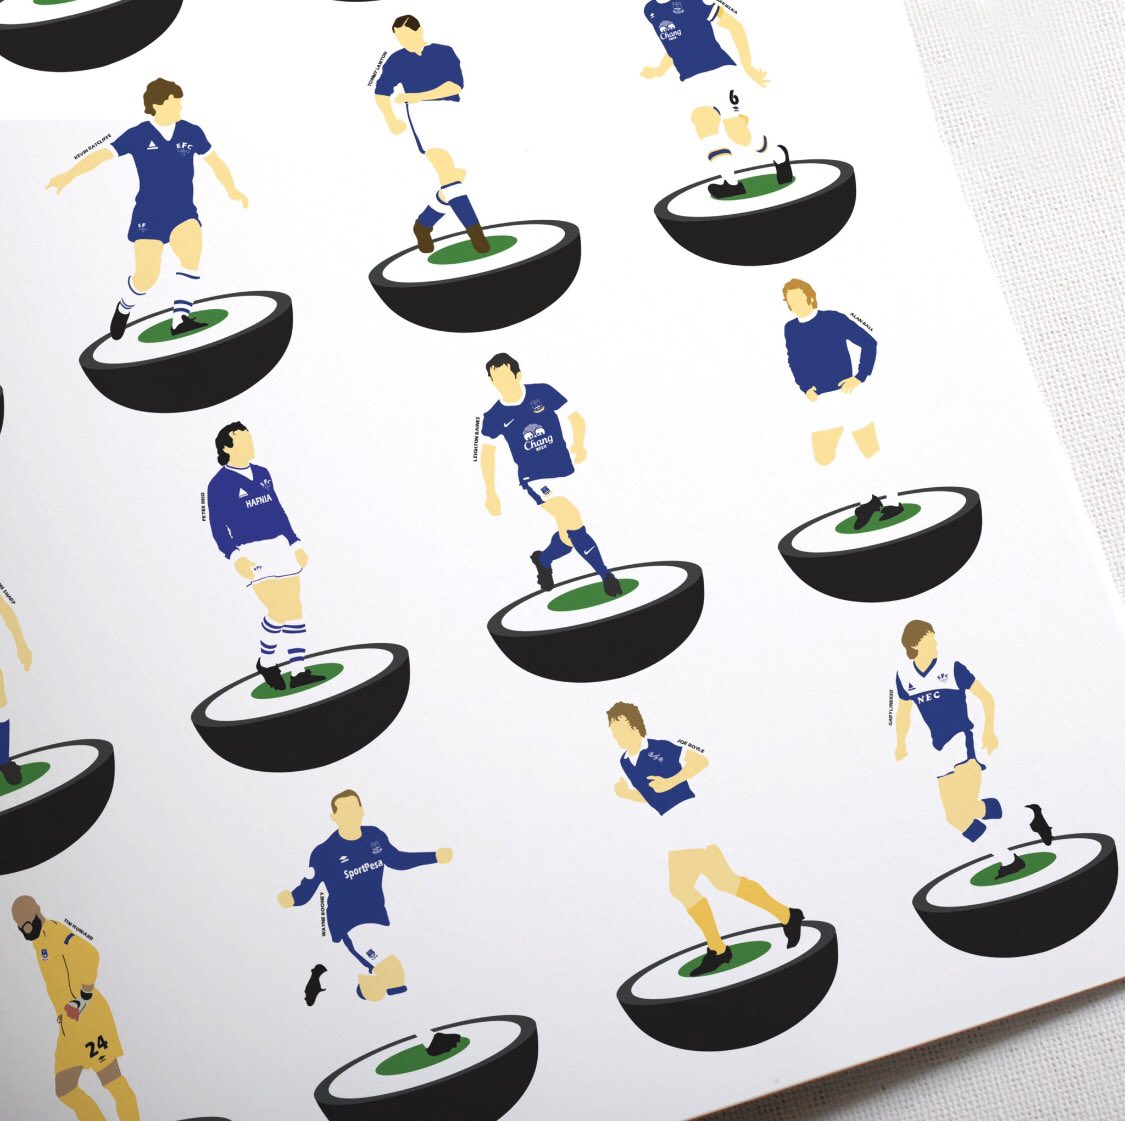 COMPETITION TIME For a chance to win this excellent A3 Subbuteo style art print, do the following: 1️⃣ Follow @PrintsGhost 2️⃣ RT this tweet The print features 20 Everton legends including Southall, Dean, Baines, Ferguson, Ball and Ratcliffe. Winner announced Mon at 8.00pm.